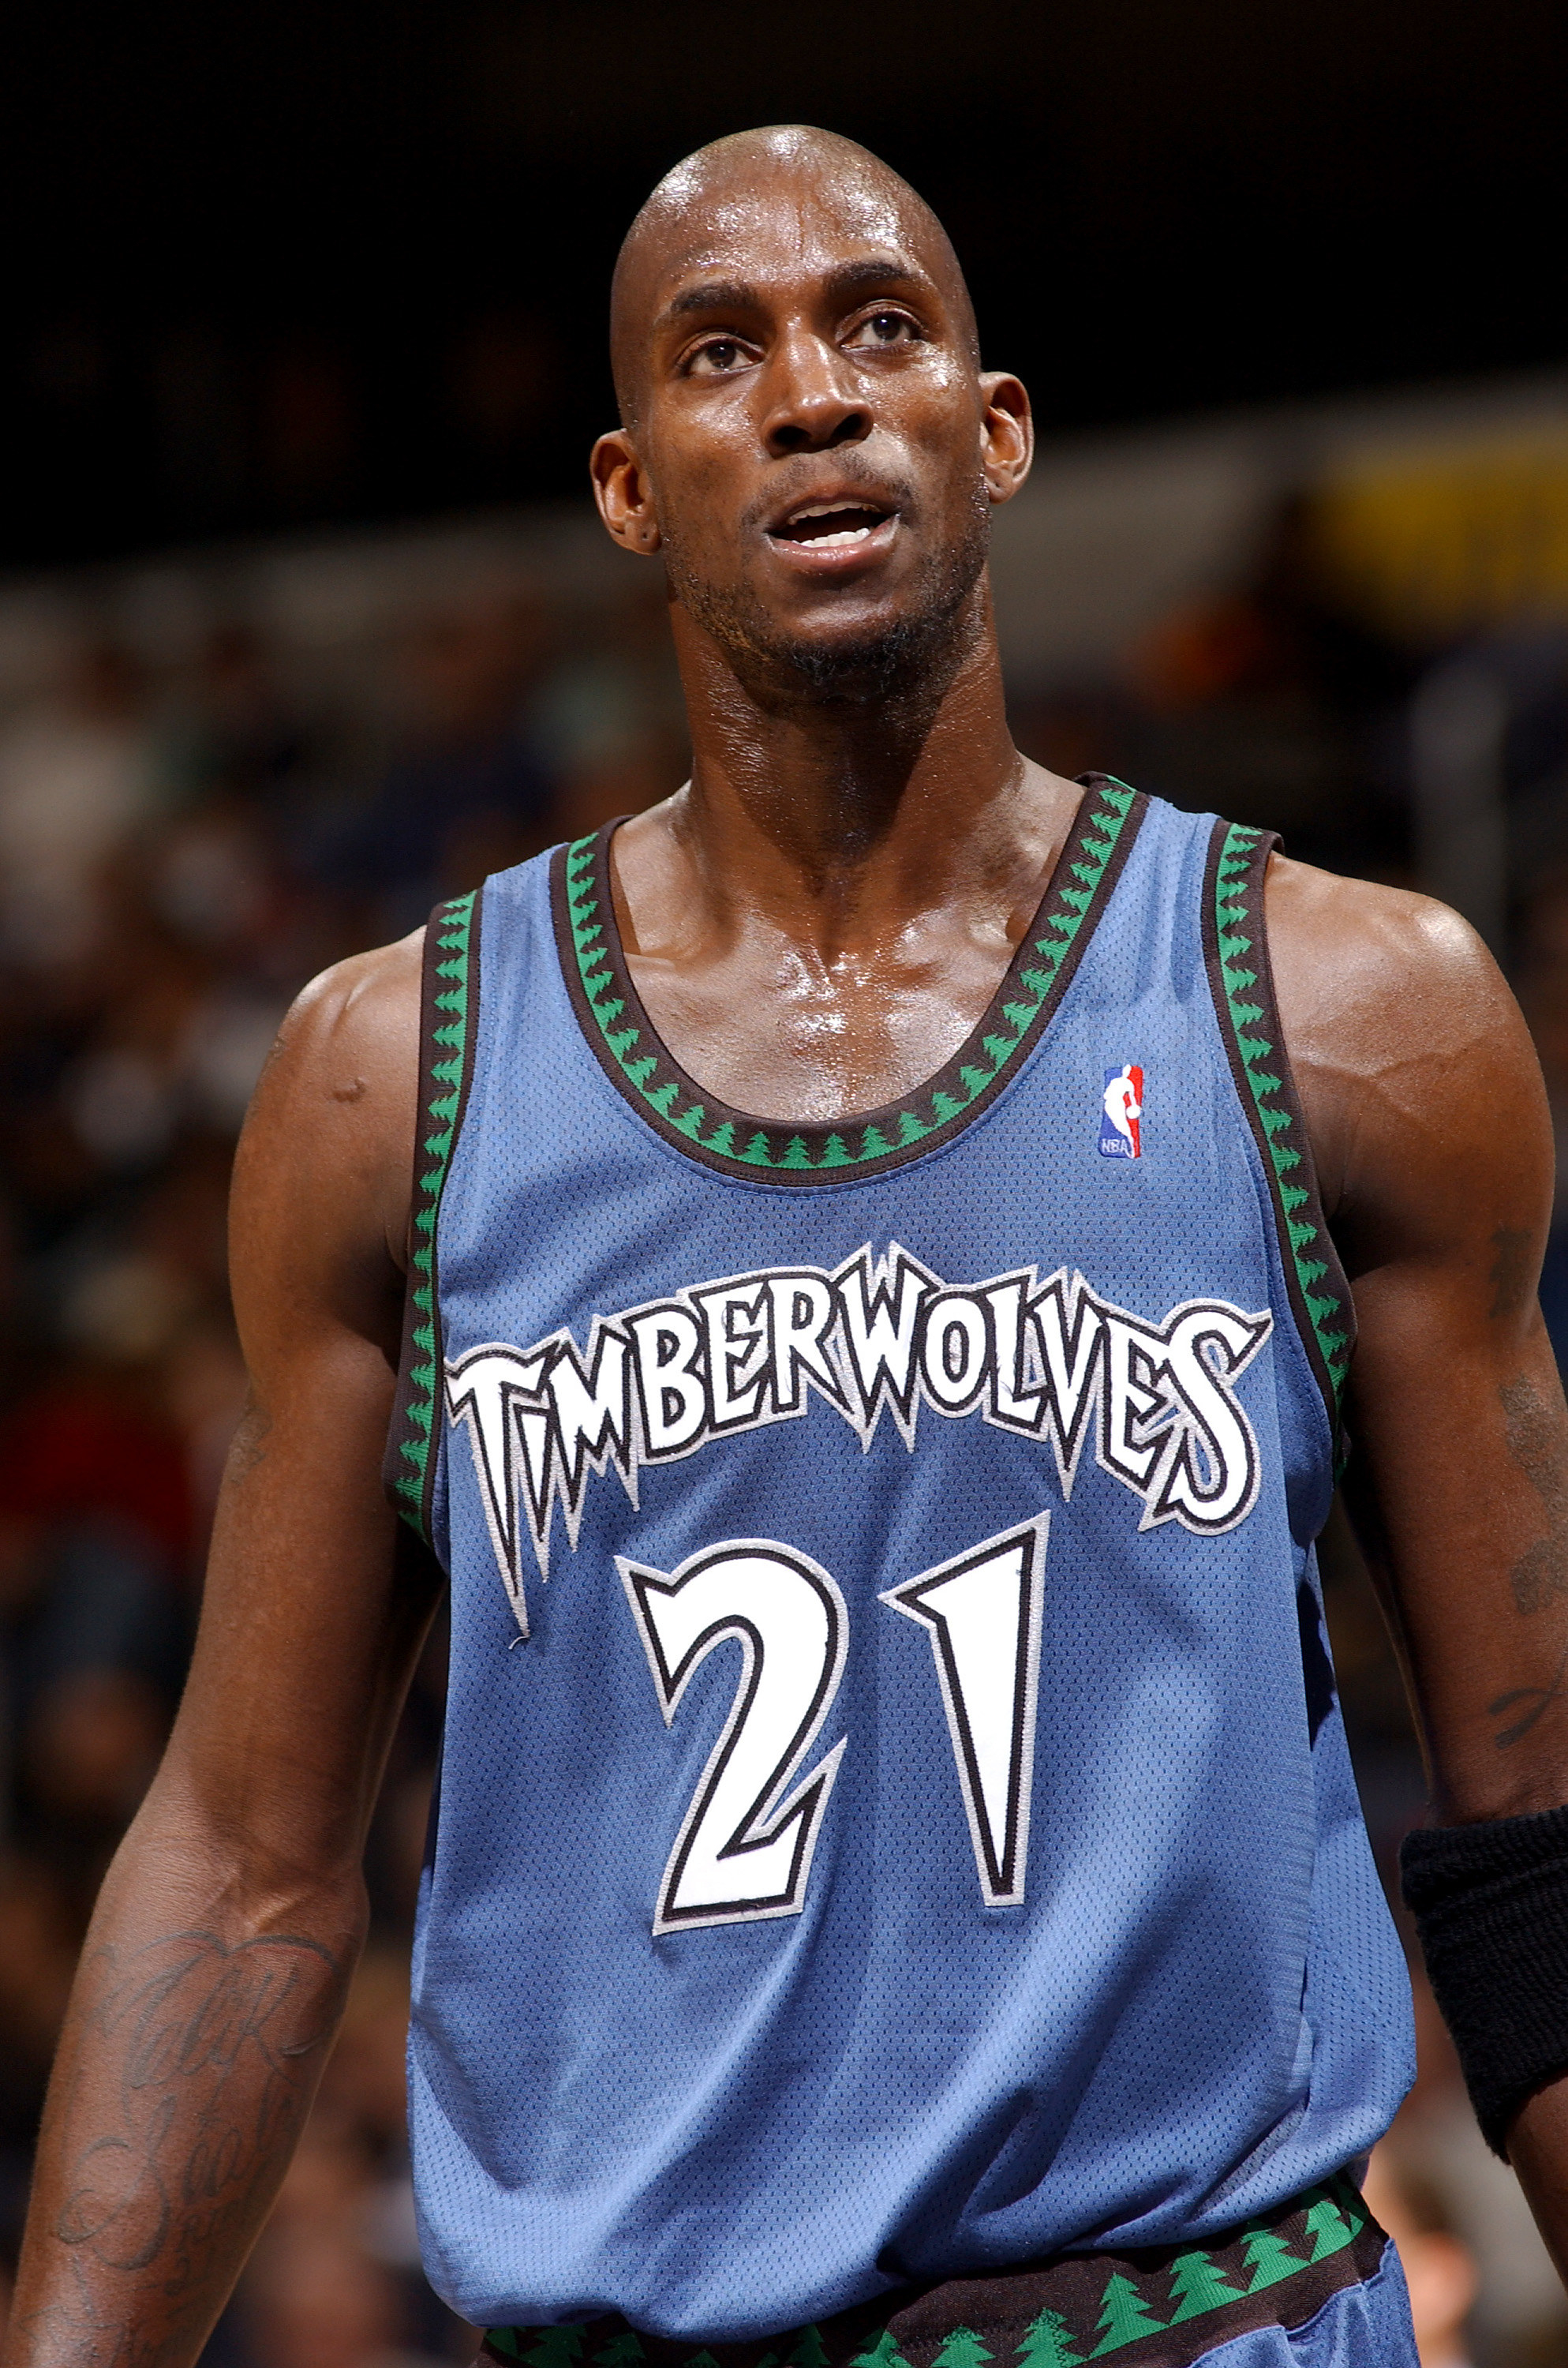 Blue Timberwolves jersey with white lettering and green trees outlining black trim